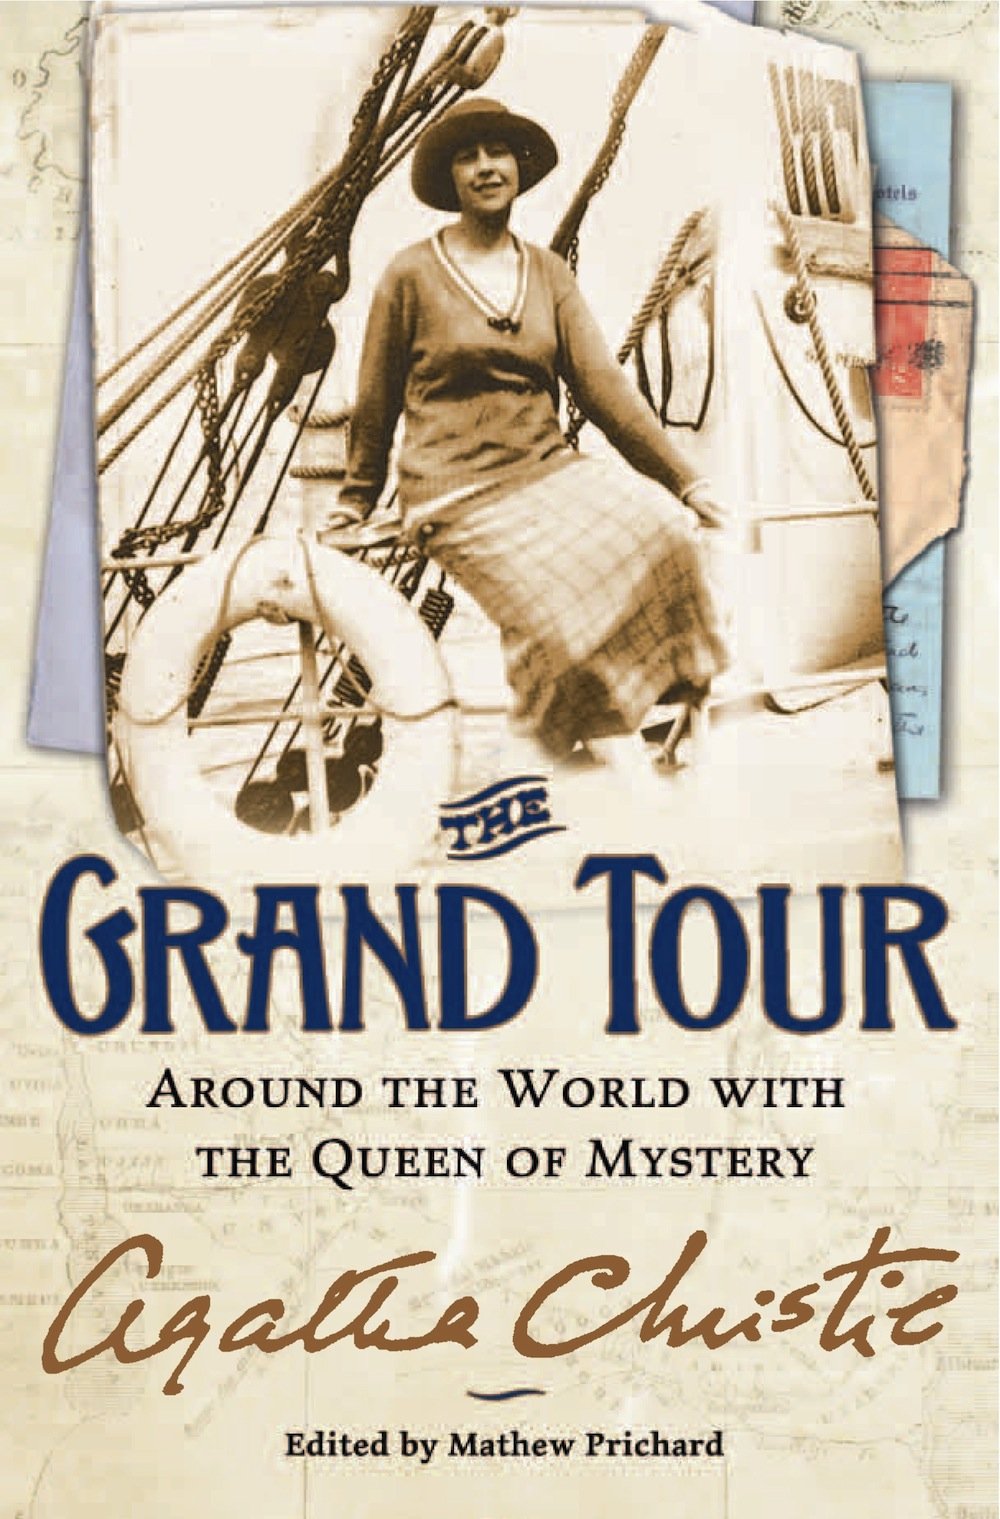 REVIEW: THE GRAND TOUR - AROUND THE WORLD WITH THE QUEEN OF MYSTERY by Agatha Christie